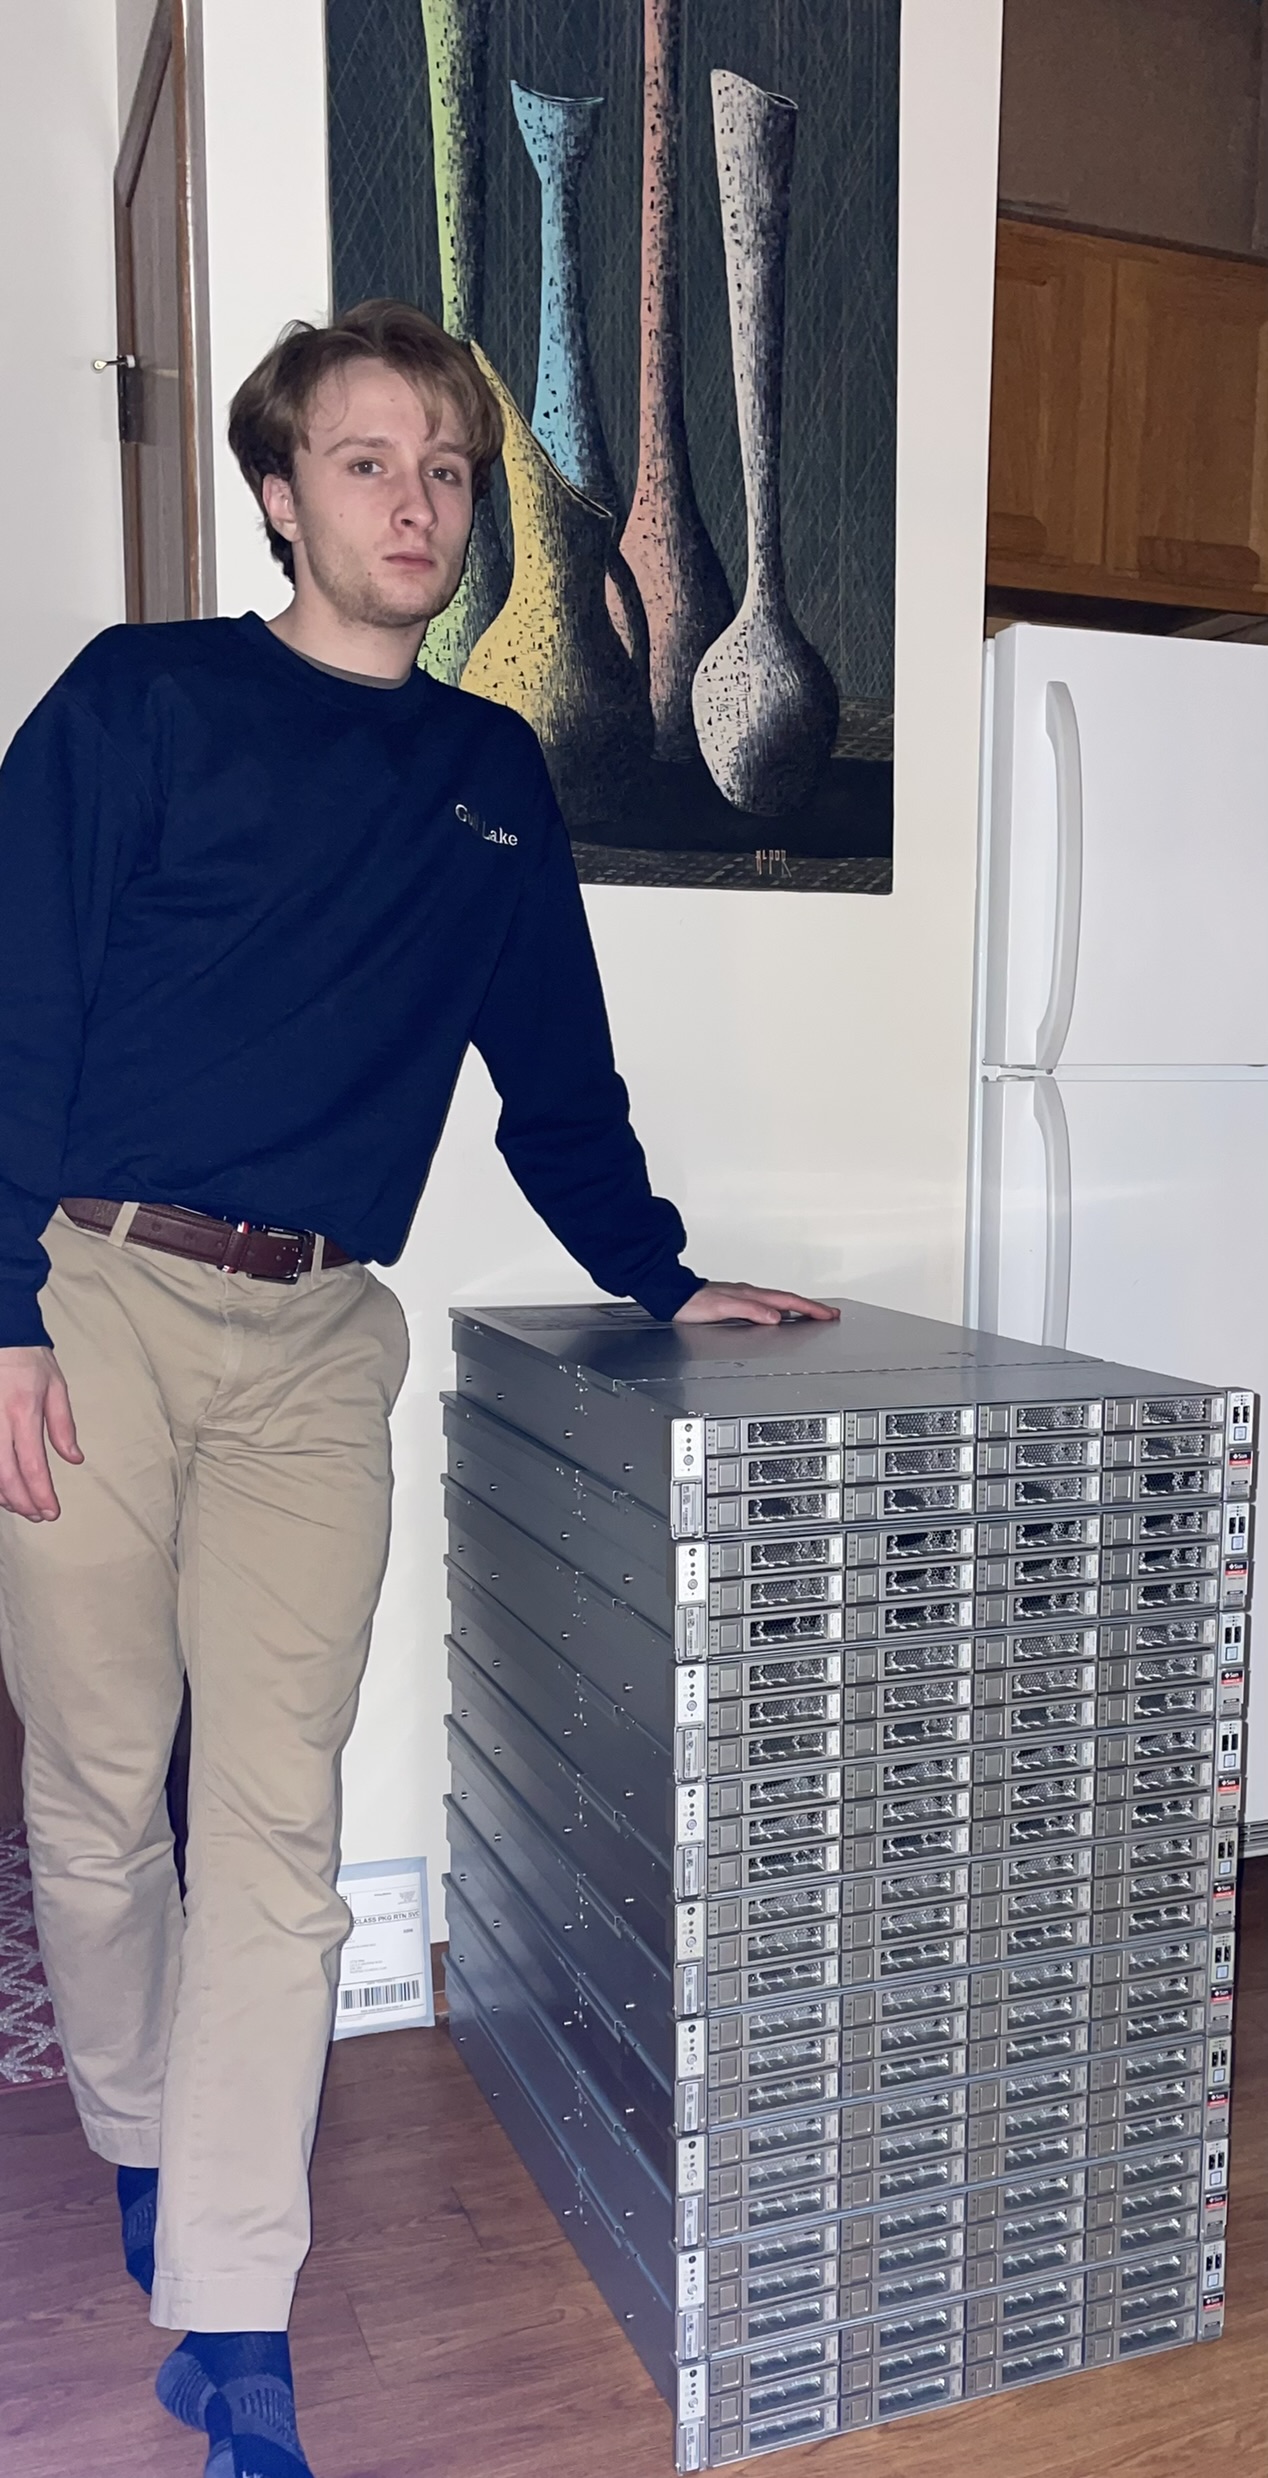 image of me with an oracle Exadata 